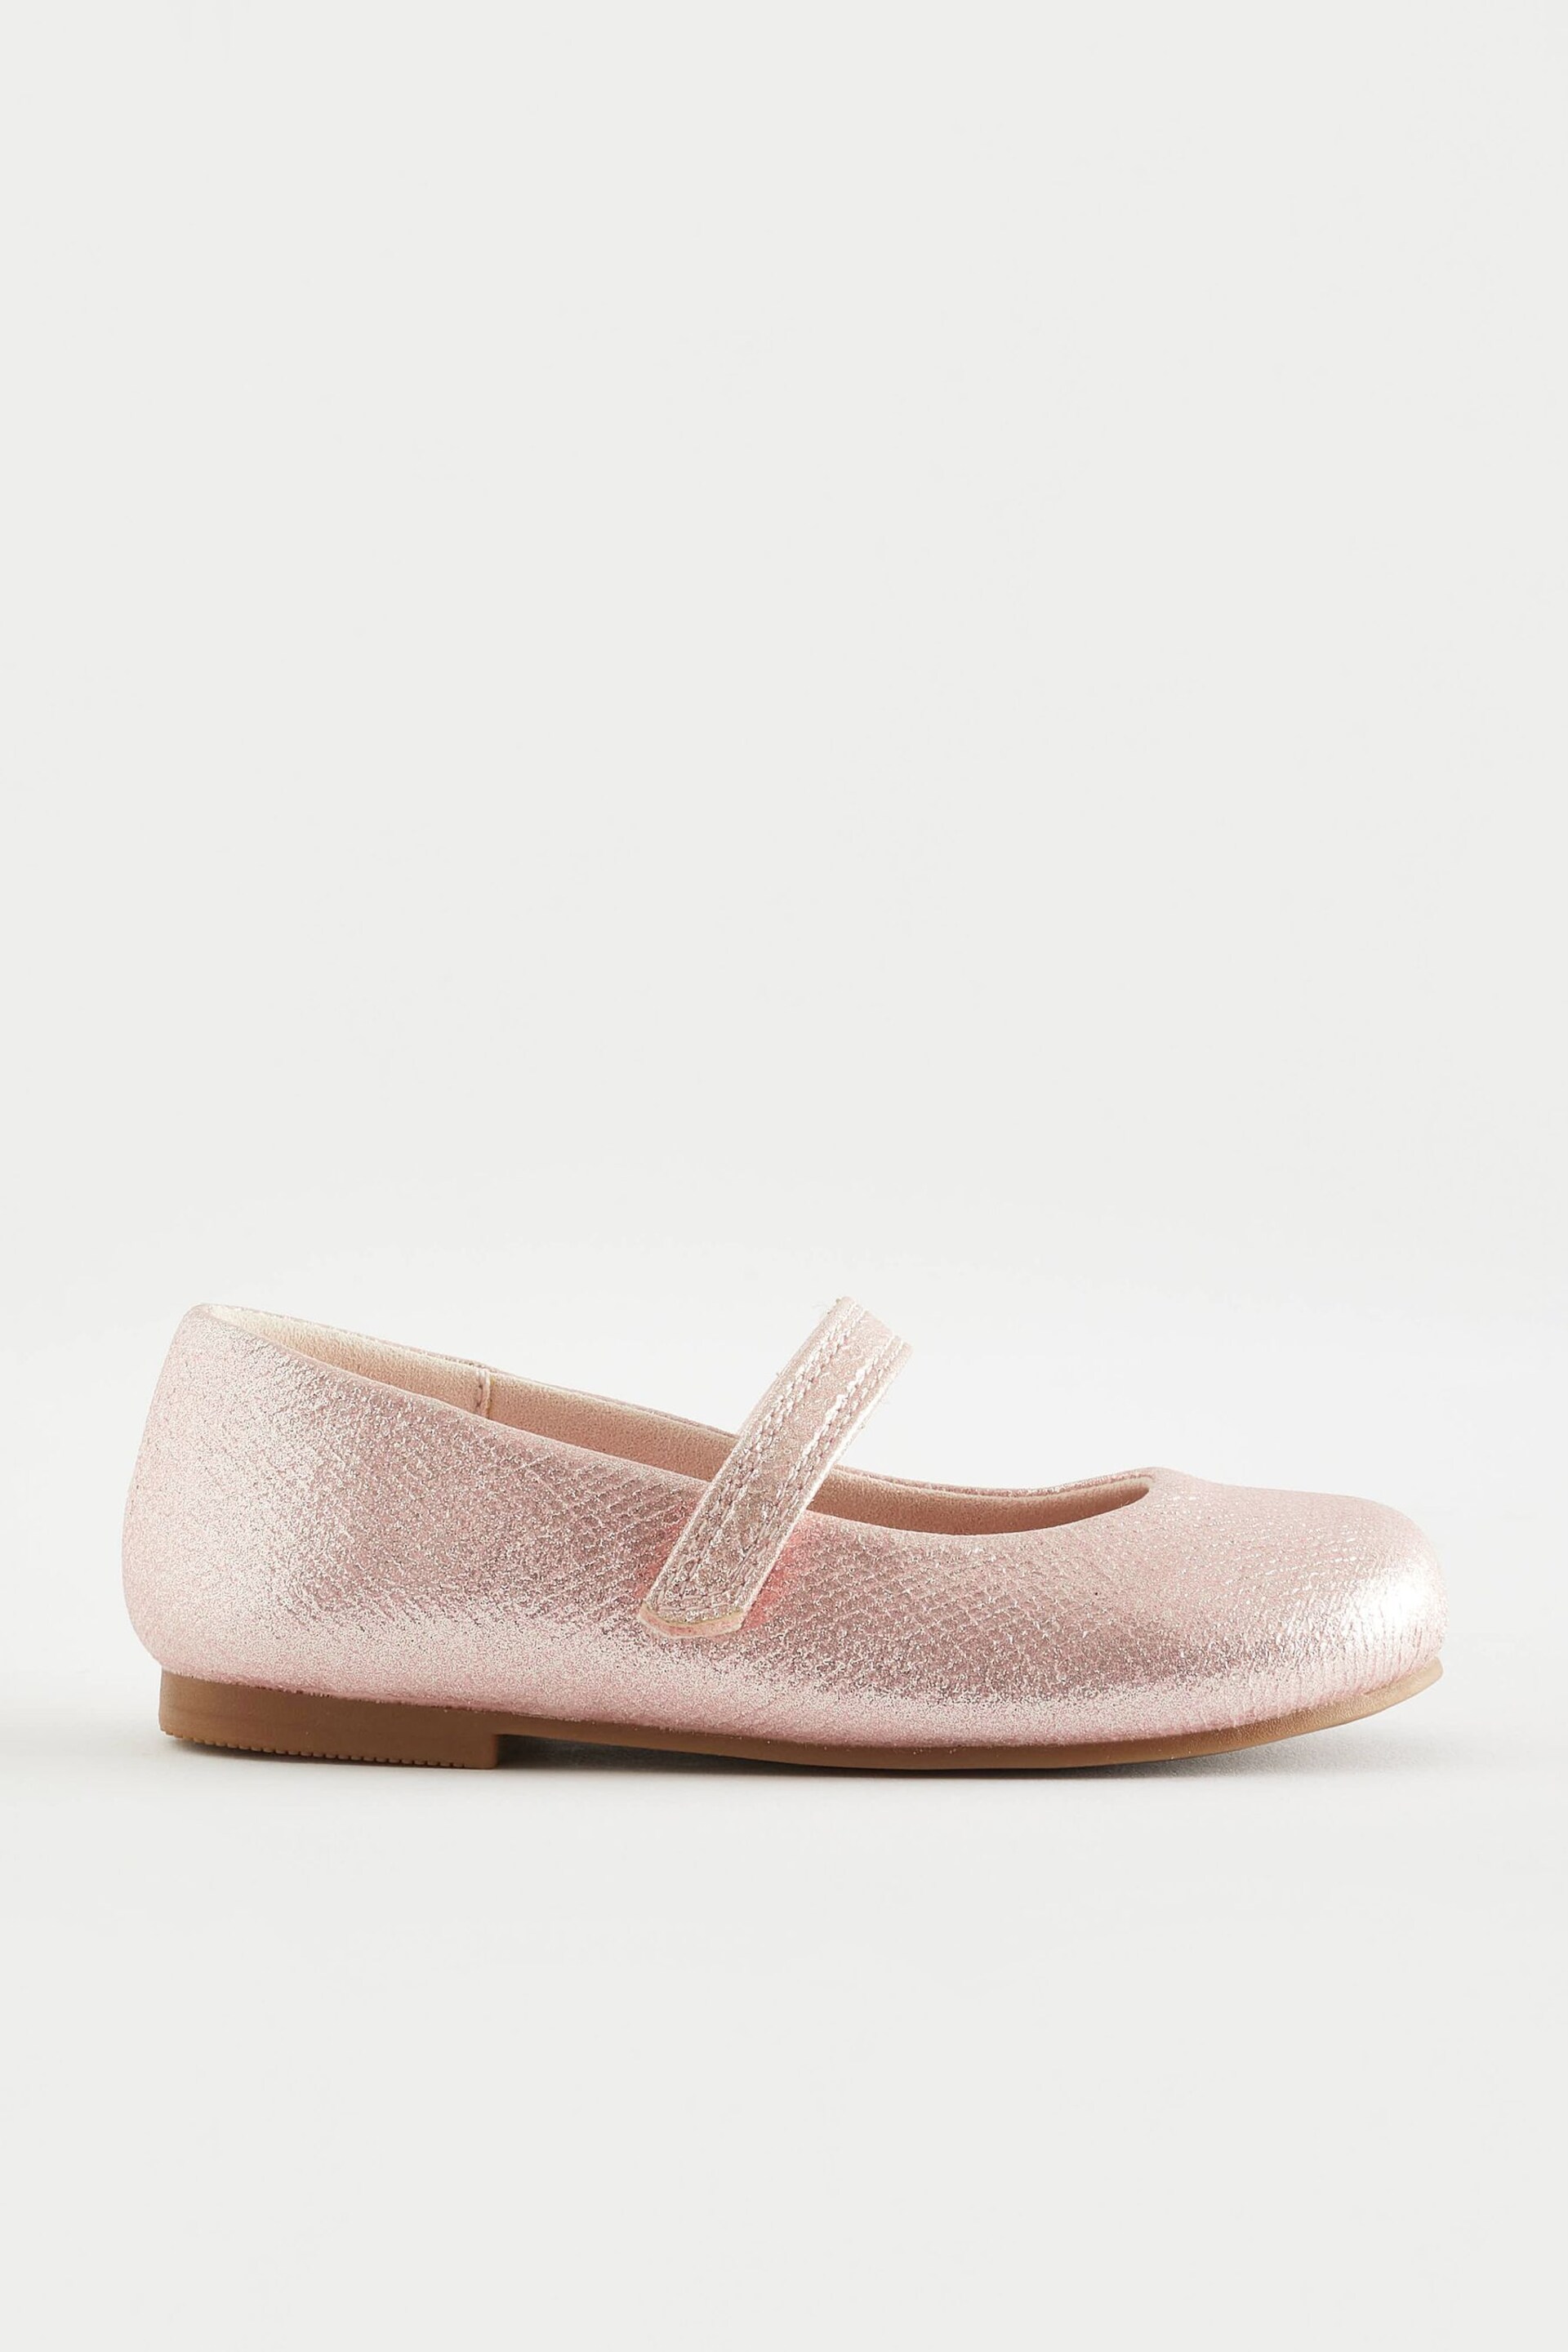 Pink Standard Fit (F) Mary Jane Occasion Shoes - Image 5 of 8